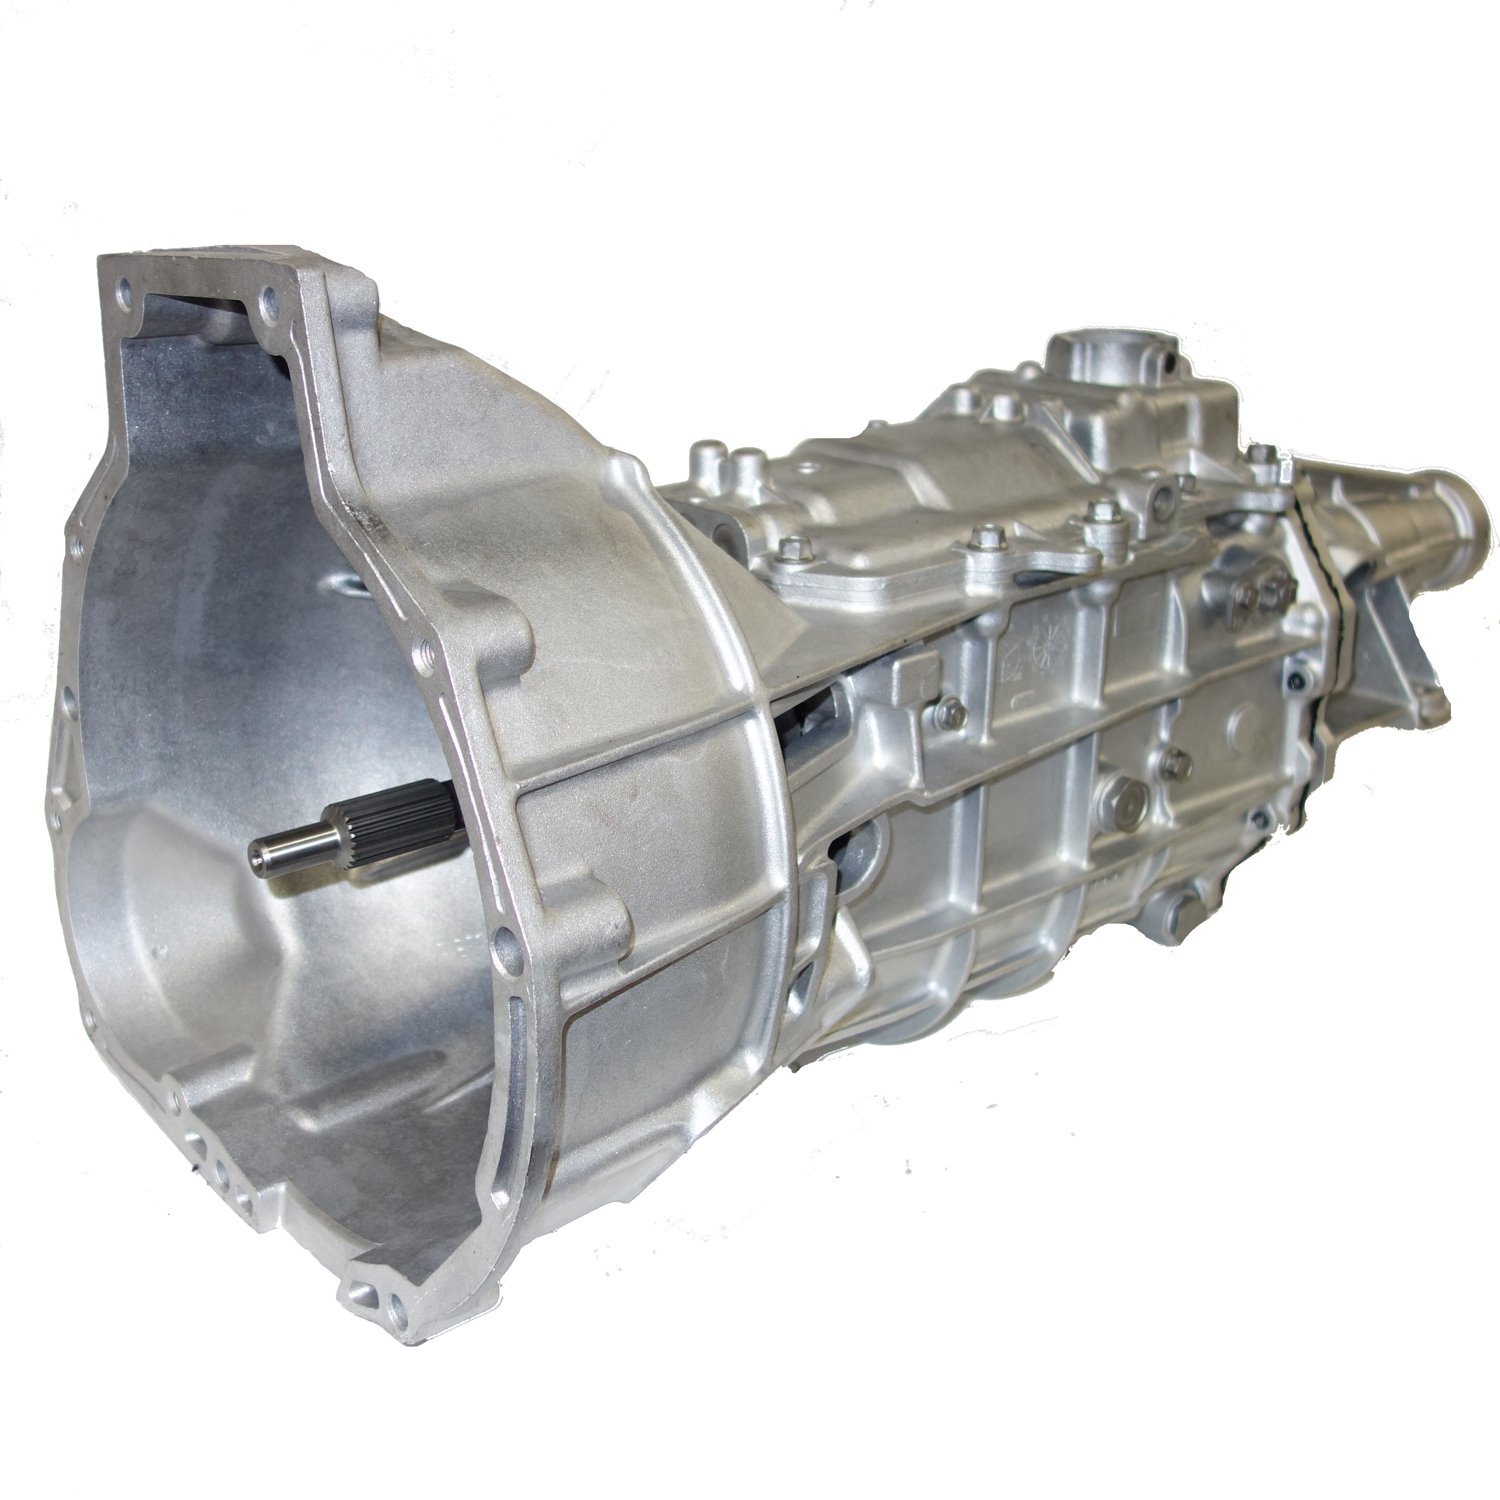 Remanufactured M5R1 Manual Transmission 1988-92 Ford Ranger 2.9L, 2WD, 6 Tooth Purple Speedo